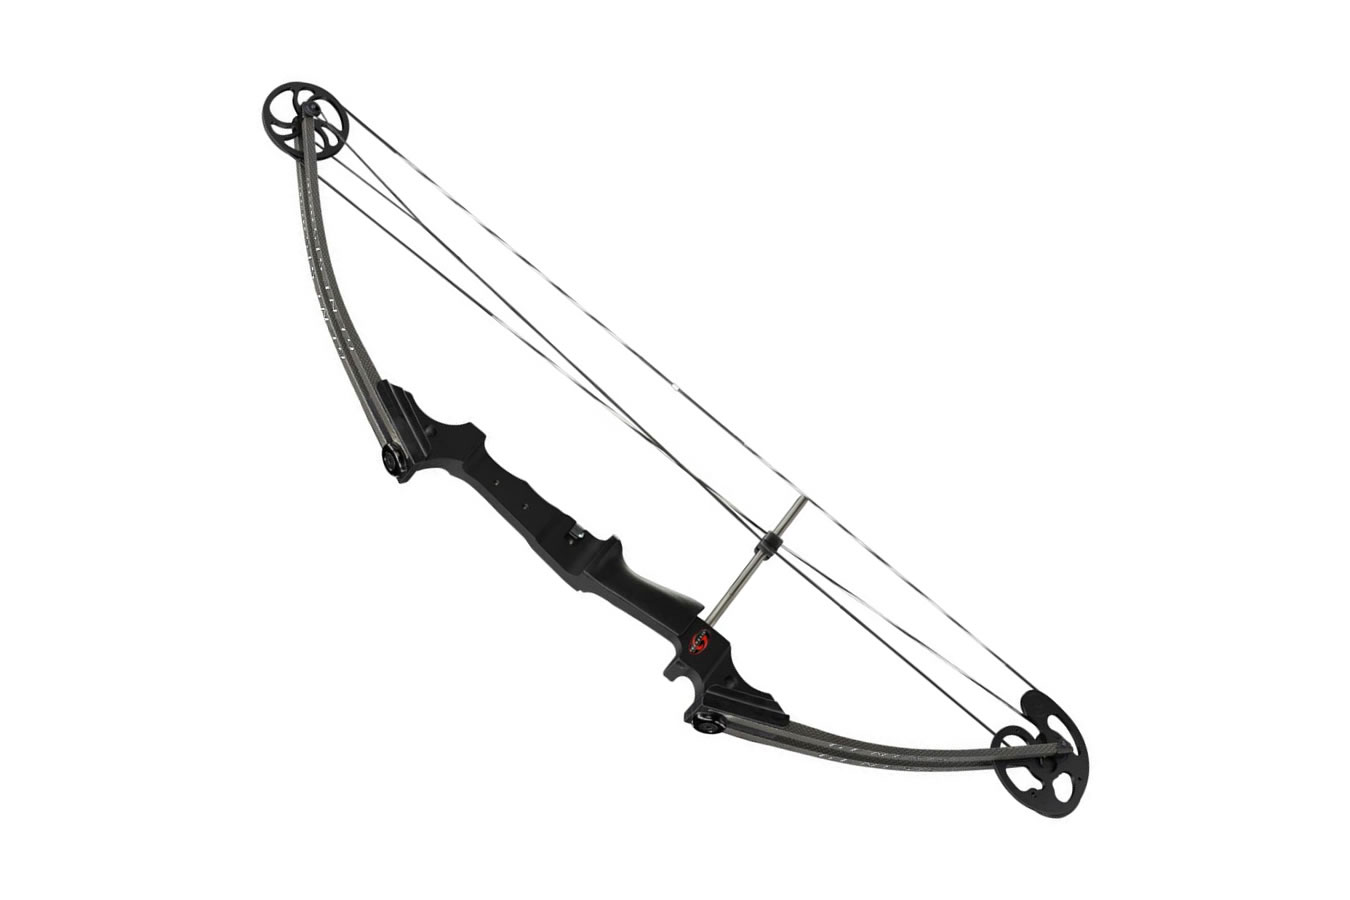 Genesis Bows Genesis Compound Bow, Adjustable Draw Weight / Length for